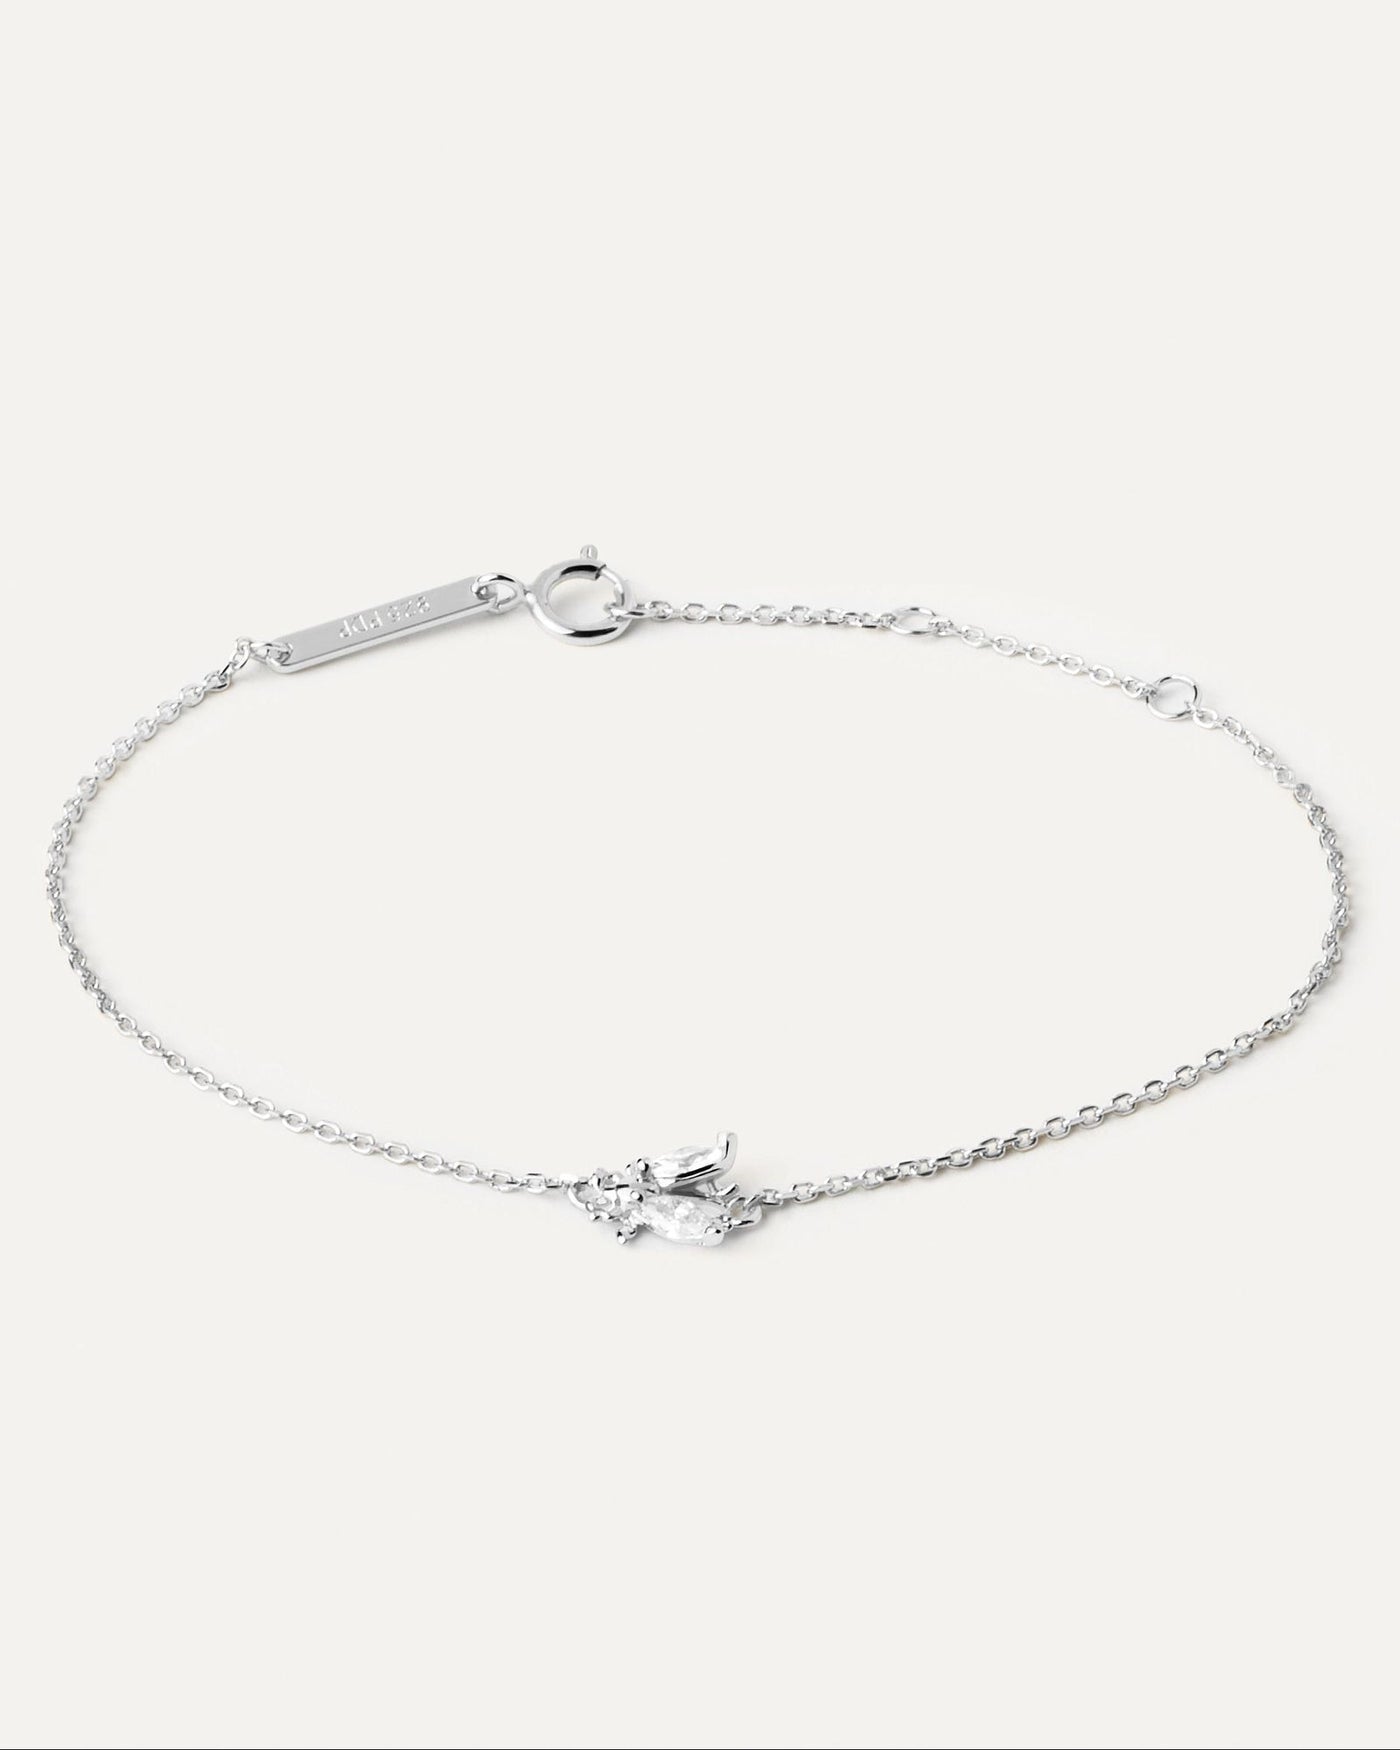 2024 Selection | Buzz Silver Bracelet. Get the latest arrival from PDPAOLA. Place your order safely and get this Best Seller. Free Shipping over 40€